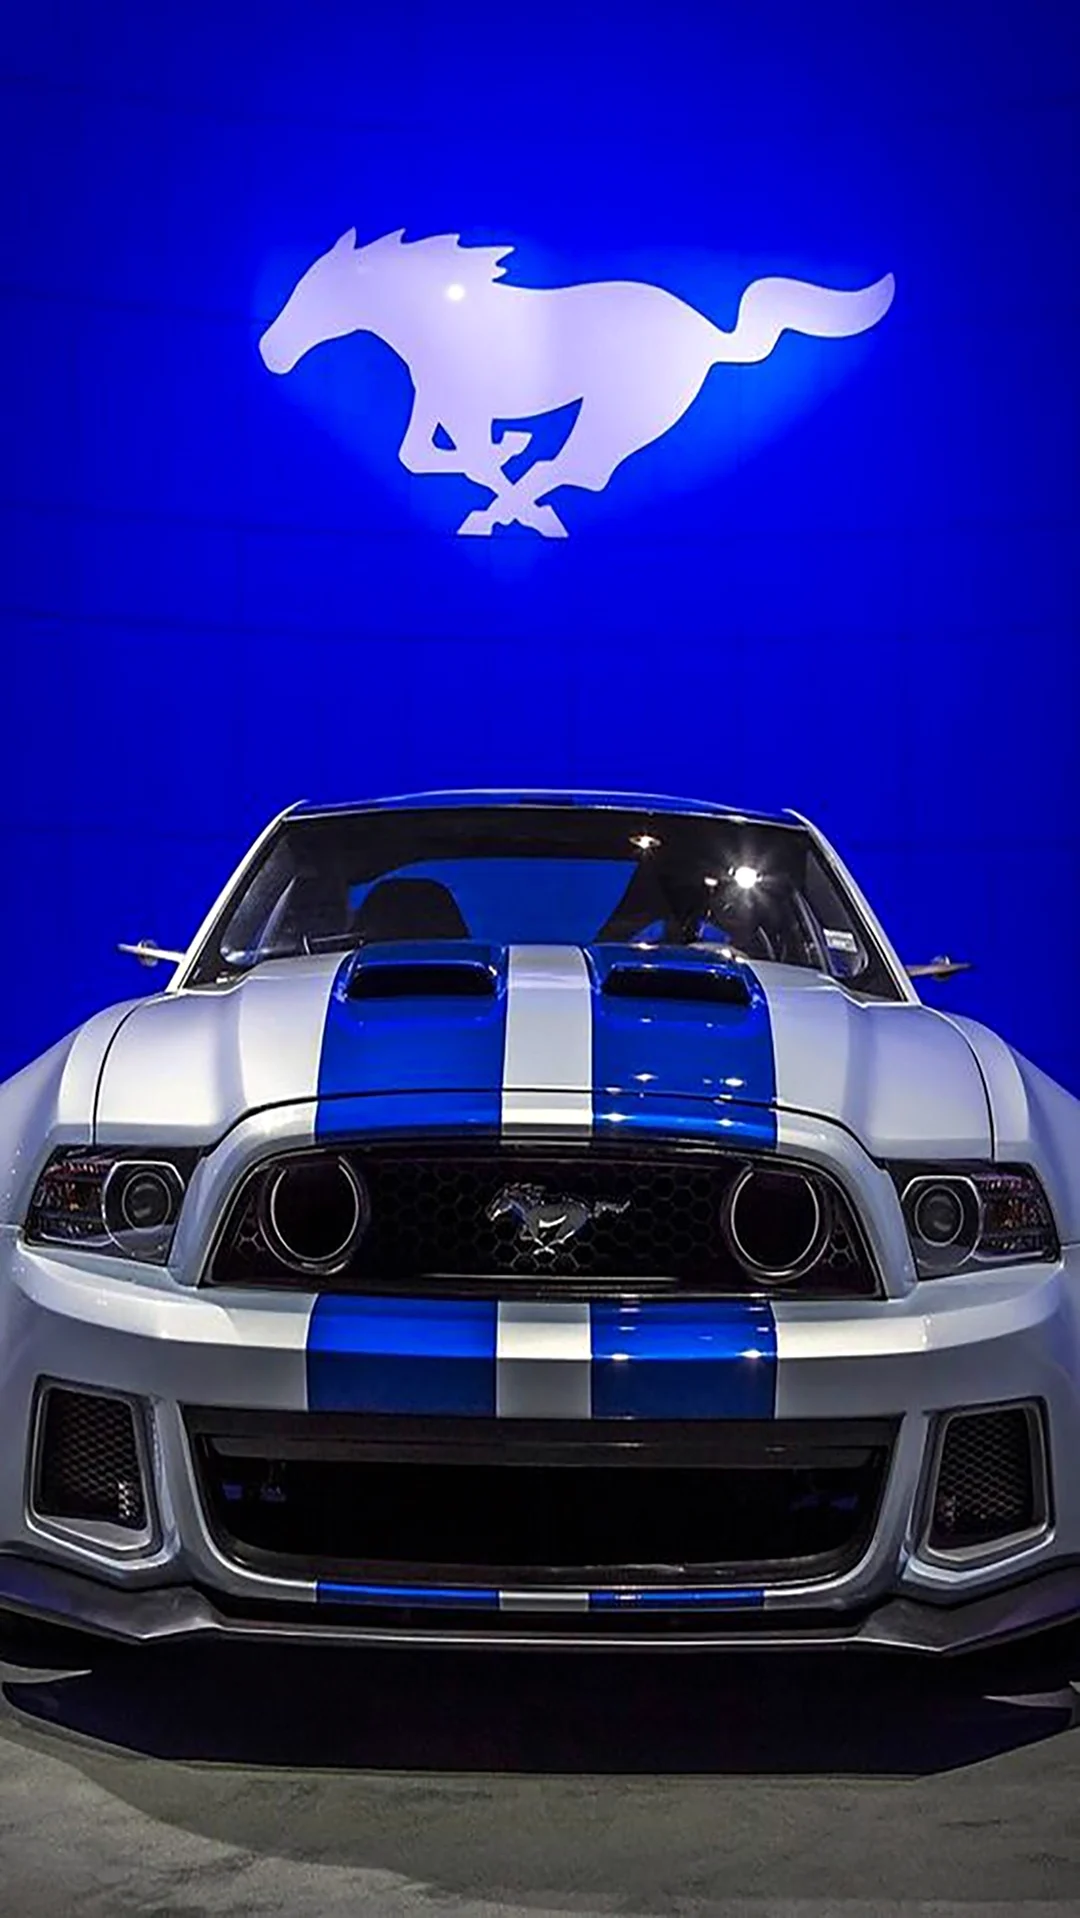 Ford Shelby gt500. Картинка